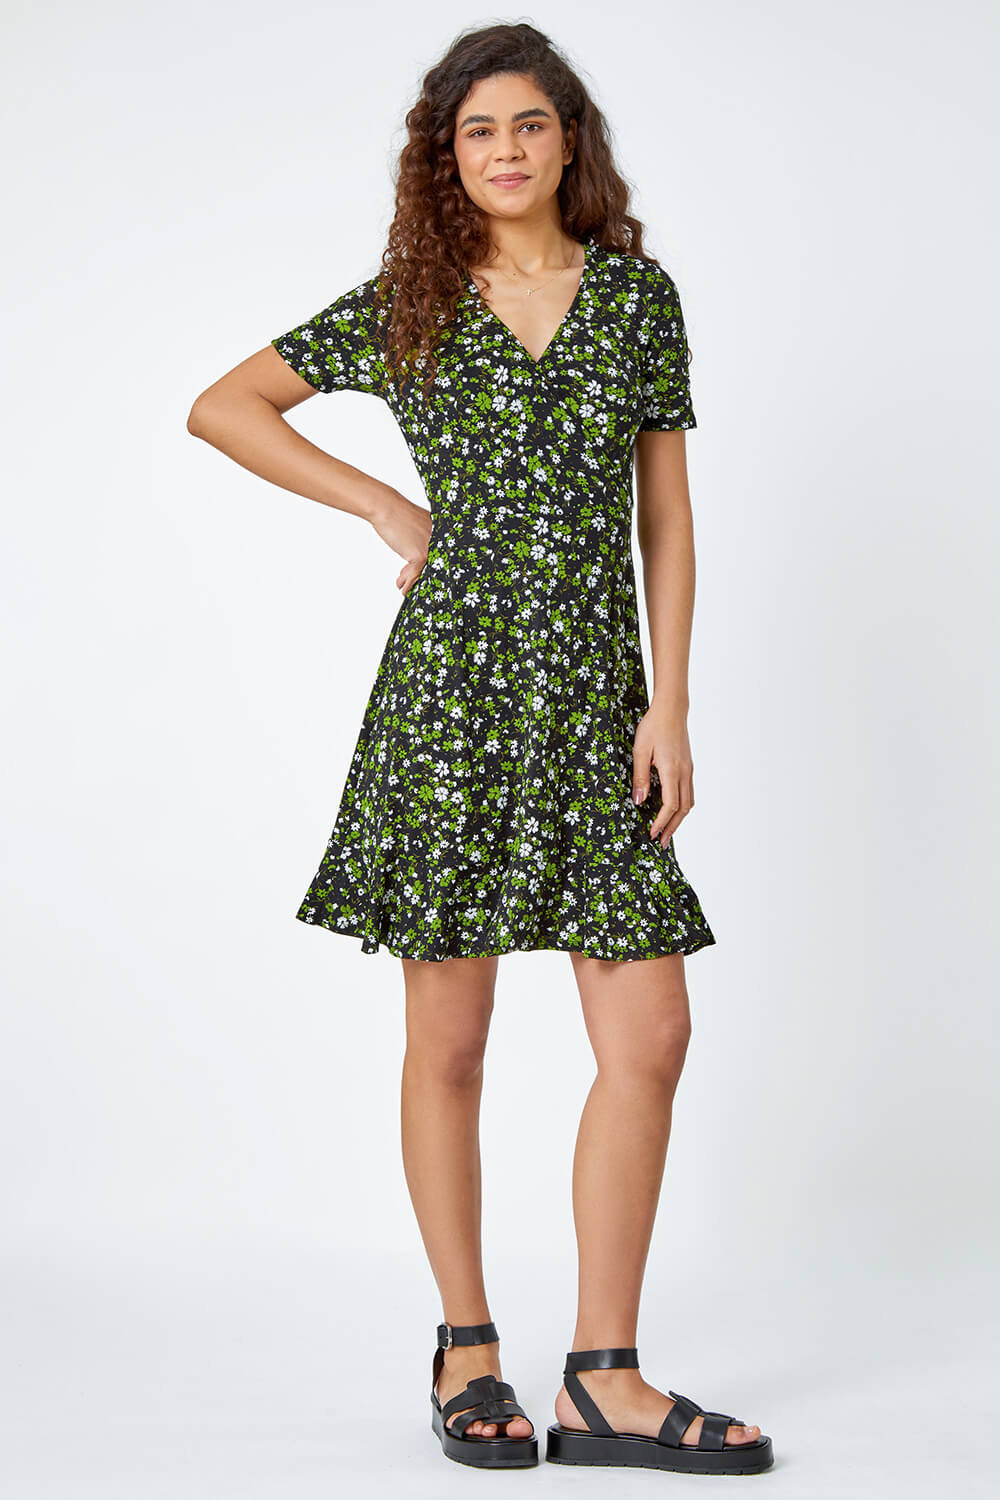 Green Floral Print Wrap Stretch Dress, Image 2 of 5